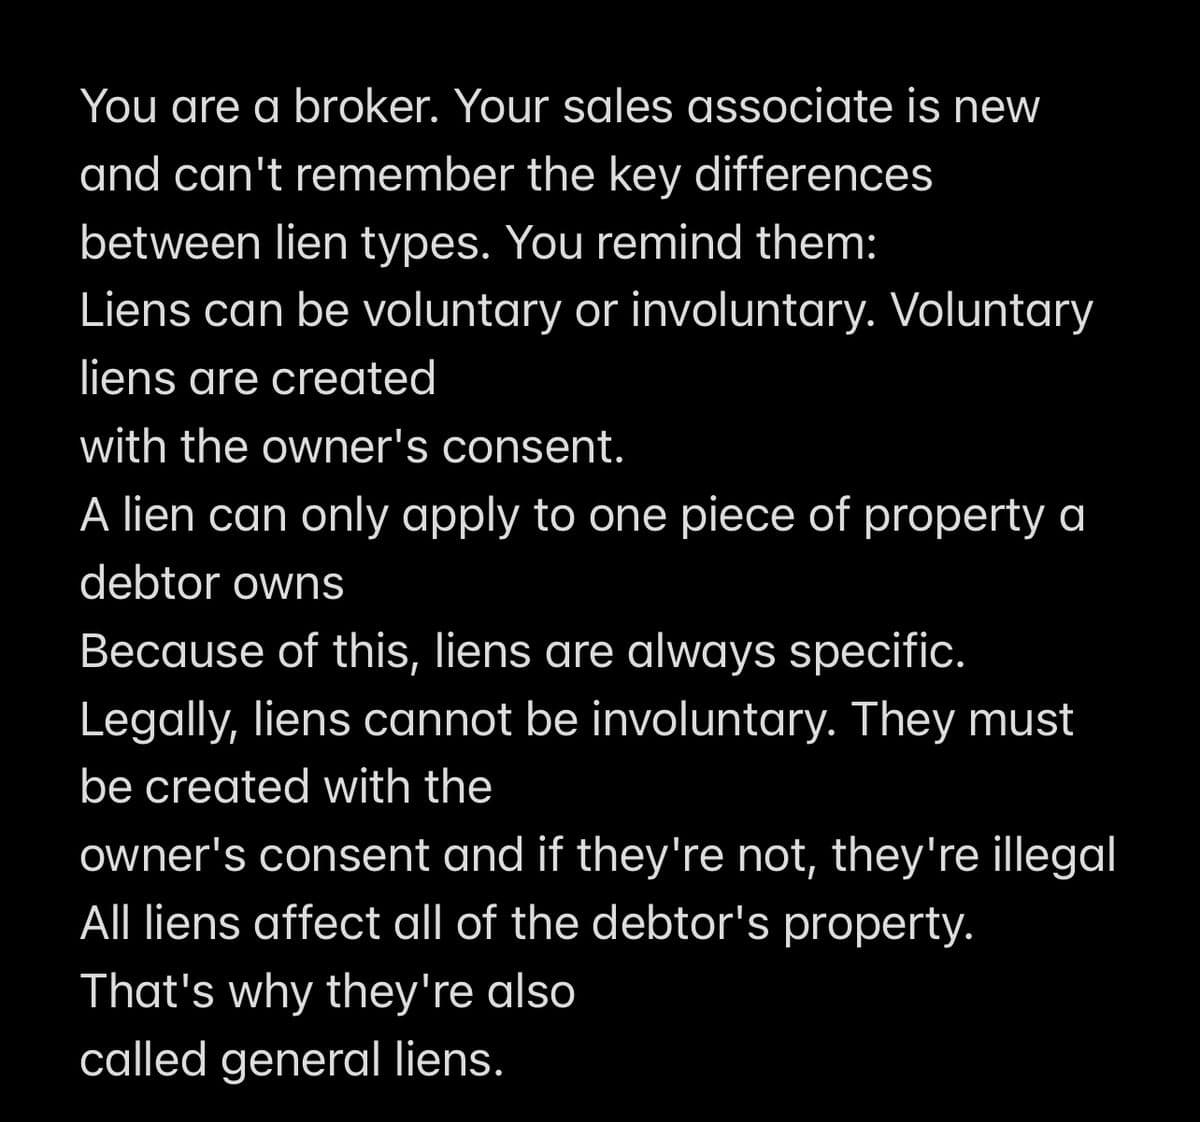 You are a broker. Your sales associate is new
and can't remember the key differences
between lien types. You remind them:
Liens can be voluntary or involuntary. Voluntary
liens are created
with the owner's consent.
A lien can only apply to one piece of property a
debtor owns
Because of this, liens are always specific.
Legally, liens cannot be involuntary. They must
be created with the
owner's consent and if they're not, they're illegal
All liens affect all of the debtor's property.
That's why they're also
called general liens.